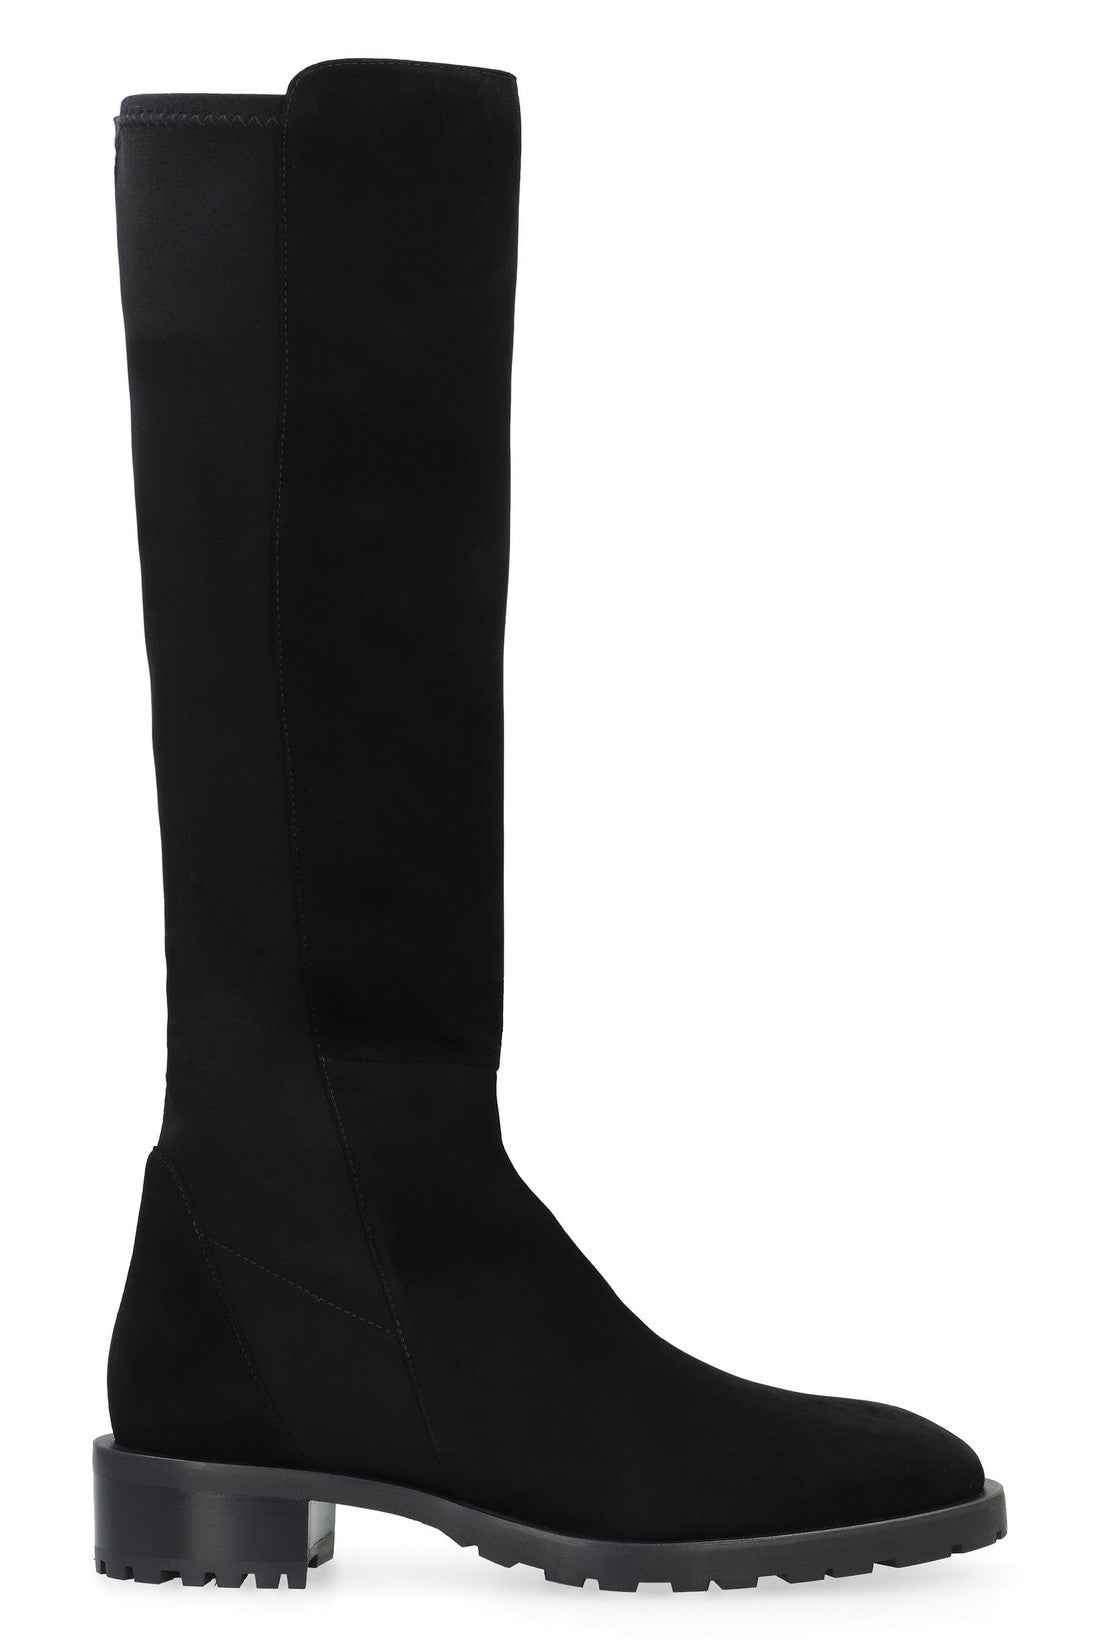 Stuart Weitzman-OUTLET-SALE-5050 leather and stretch fabric boots-ARCHIVIST